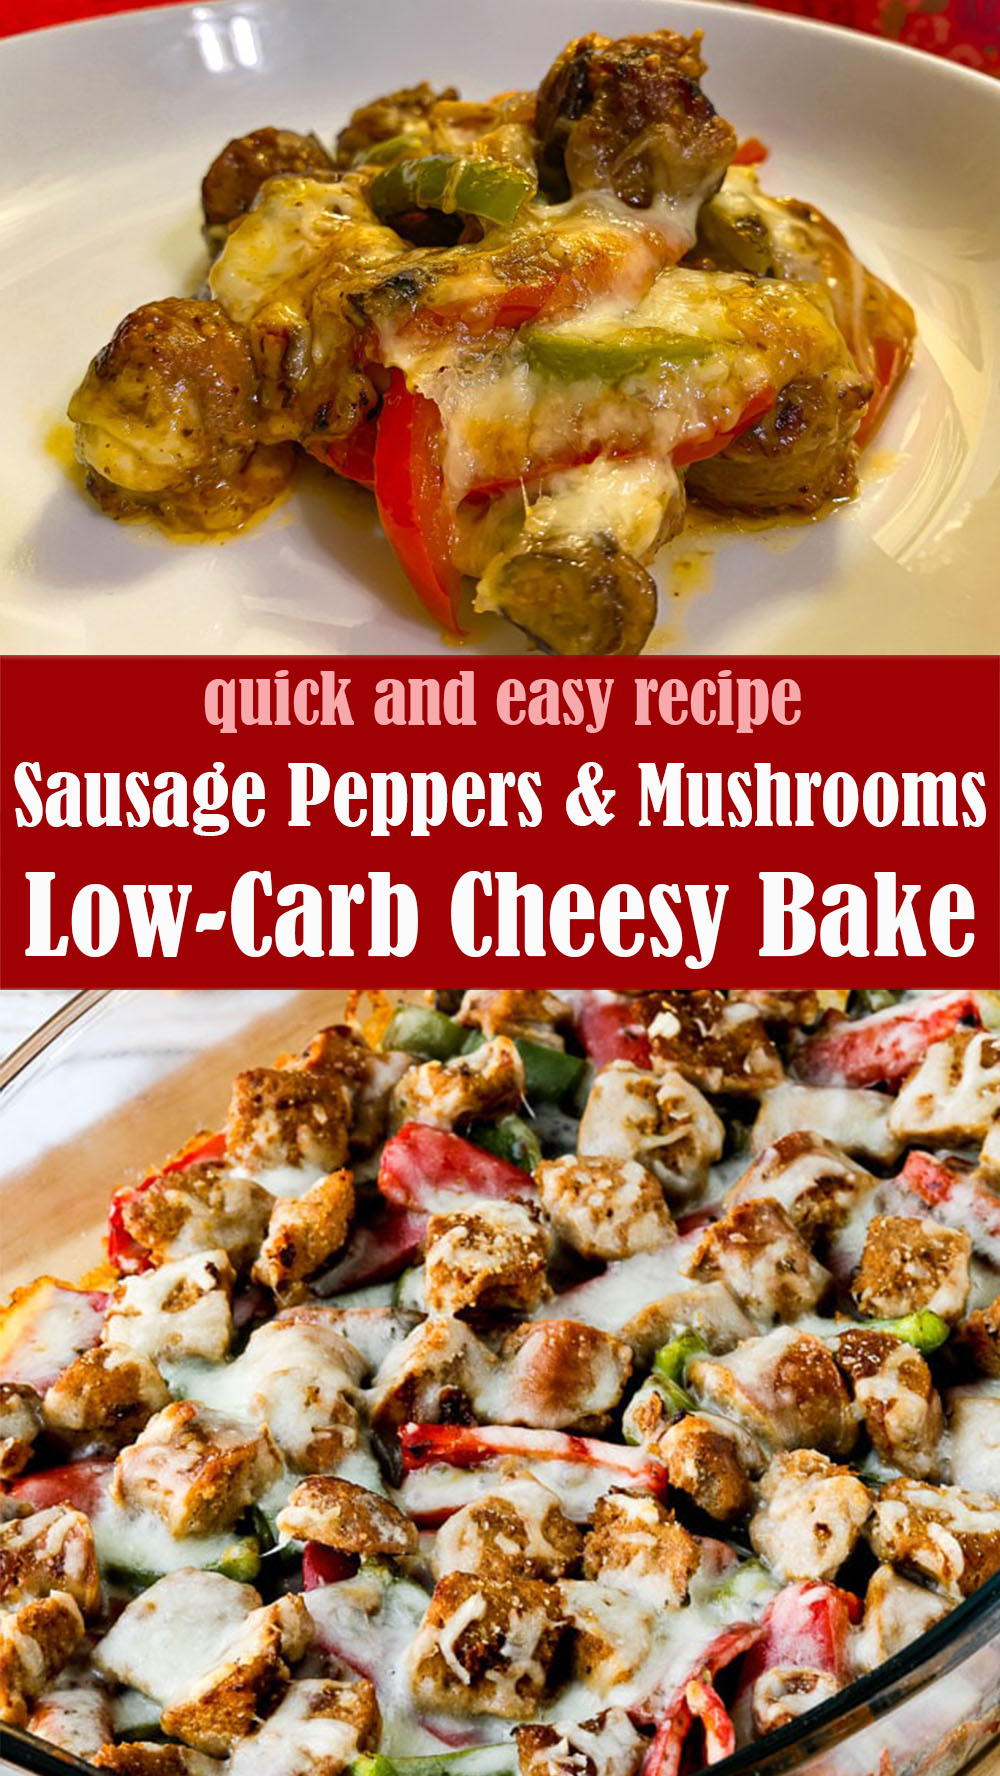 Quick and Easy Sausage, Peppers, and Mushrooms Low-Carb Cheesy Bake